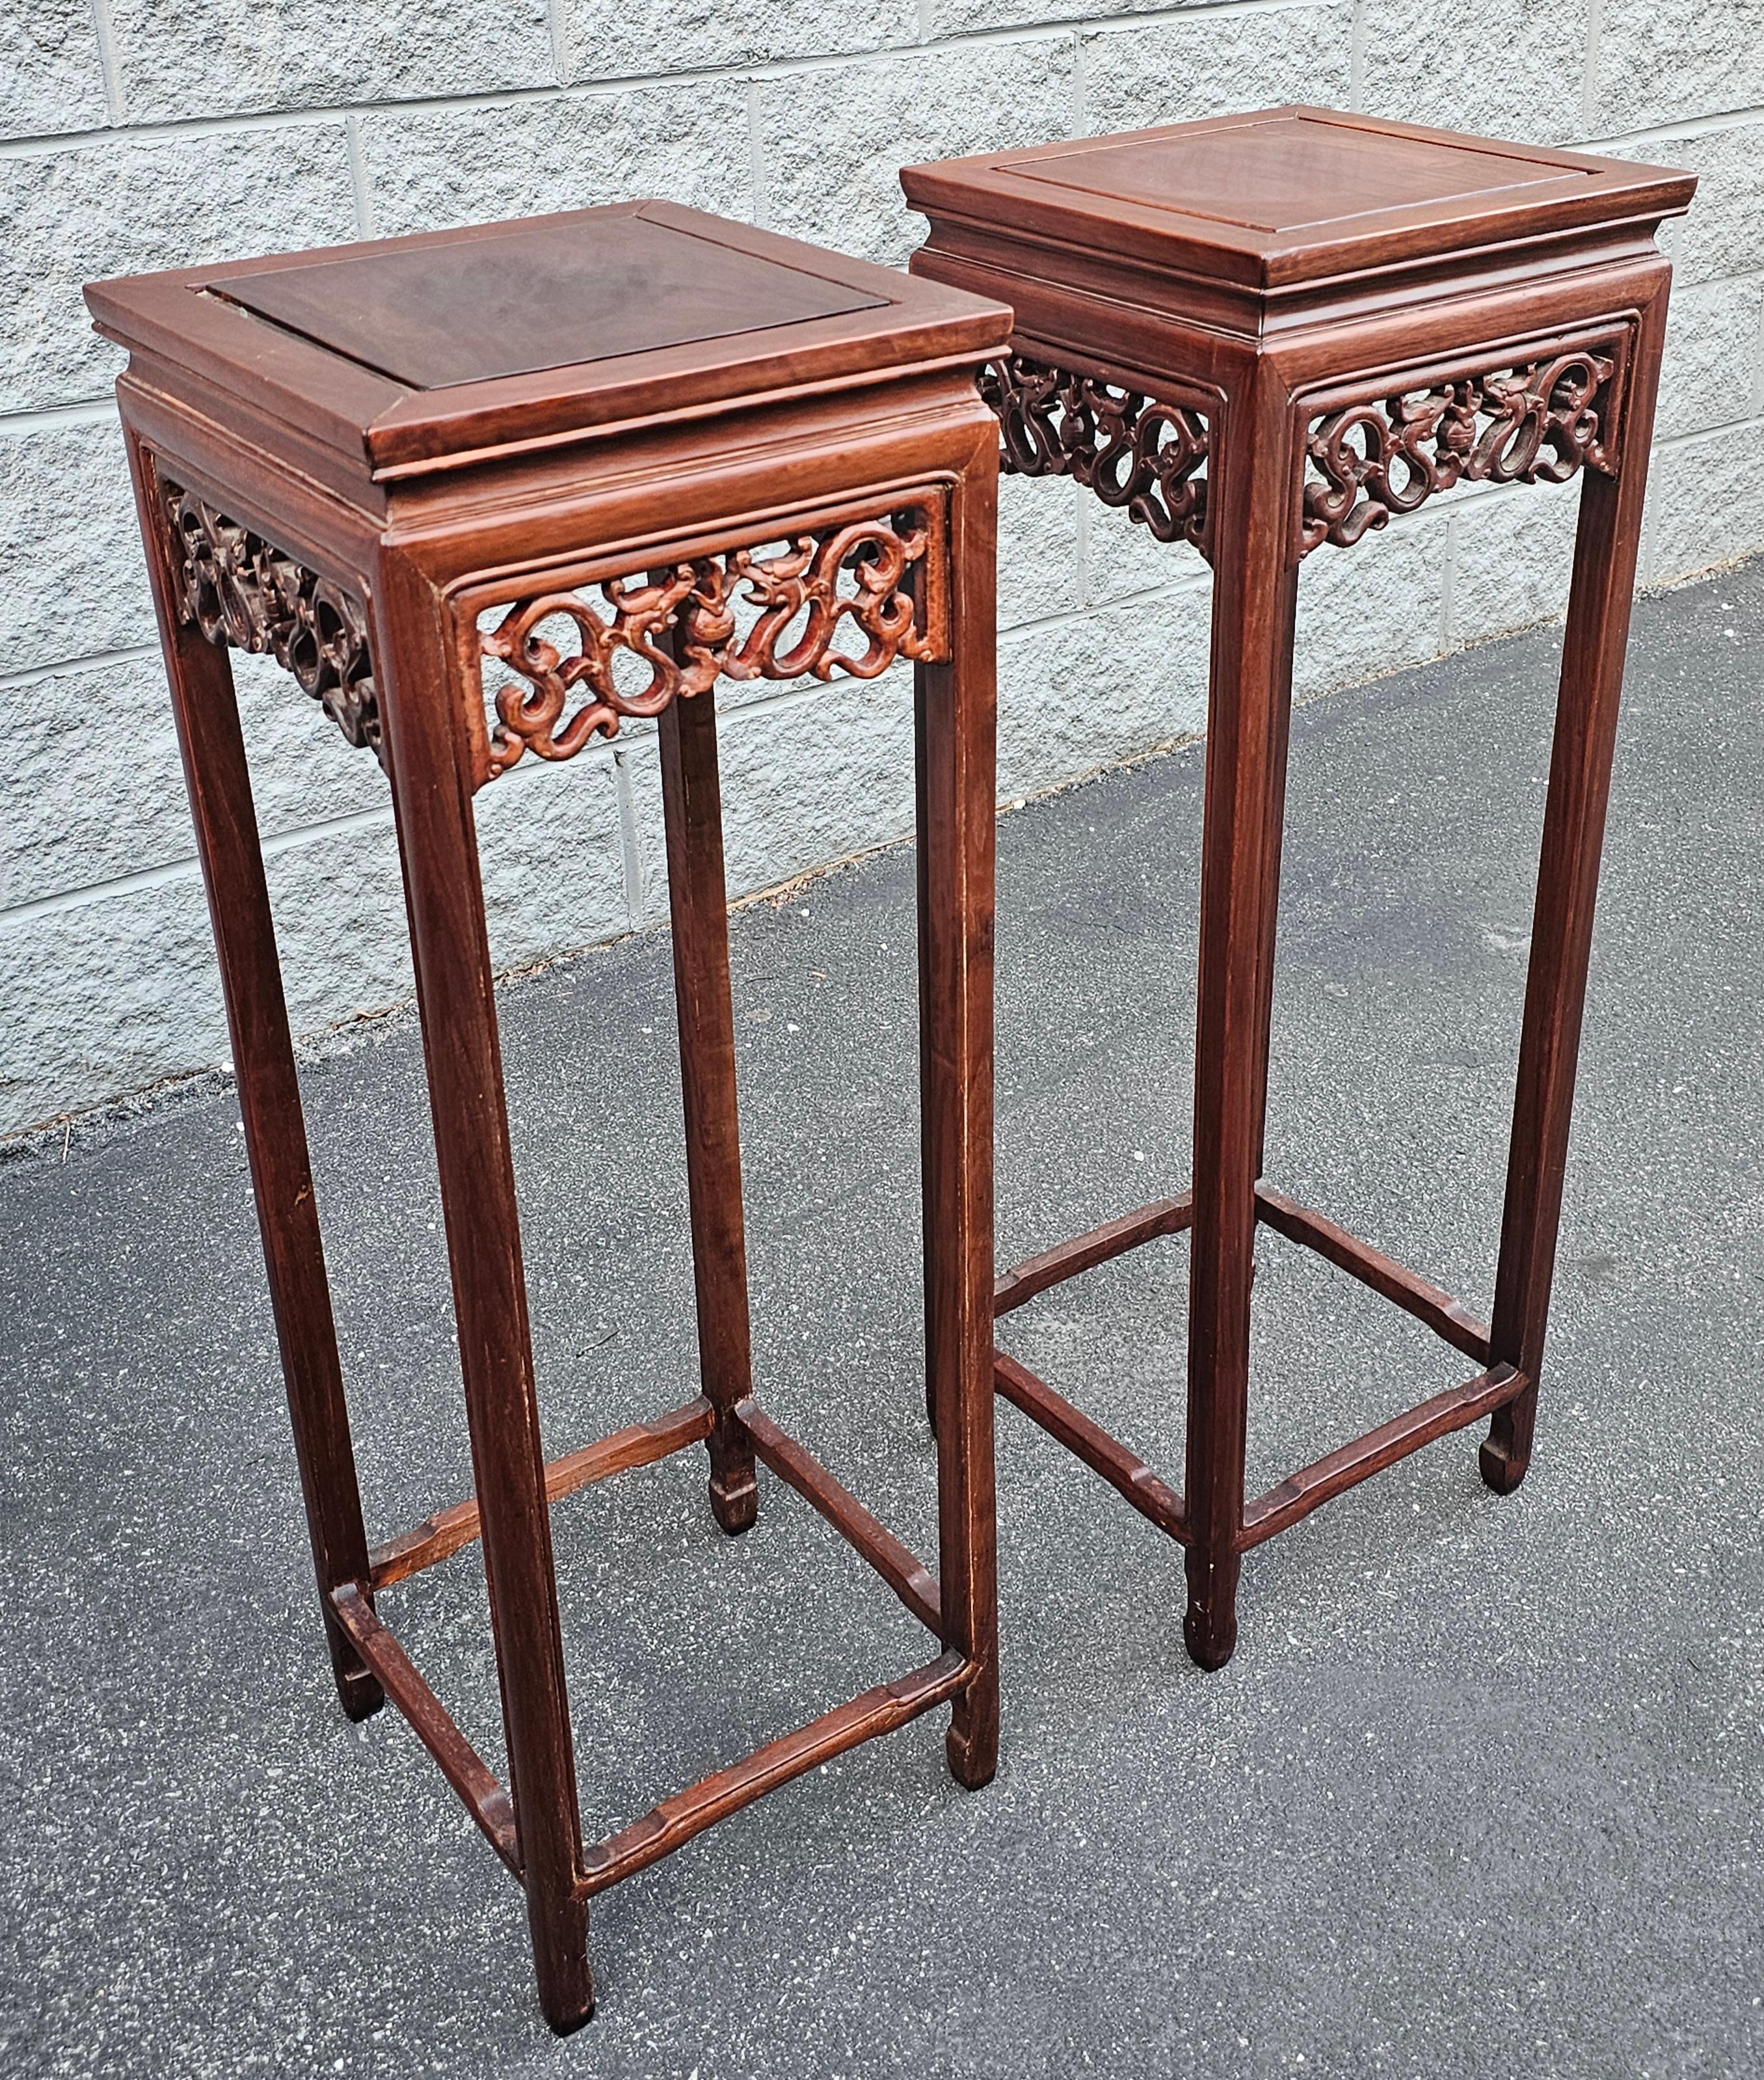 Pair of Chinese Hongmu Stands Pedestals / Plant Stands In Good Condition For Sale In Germantown, MD